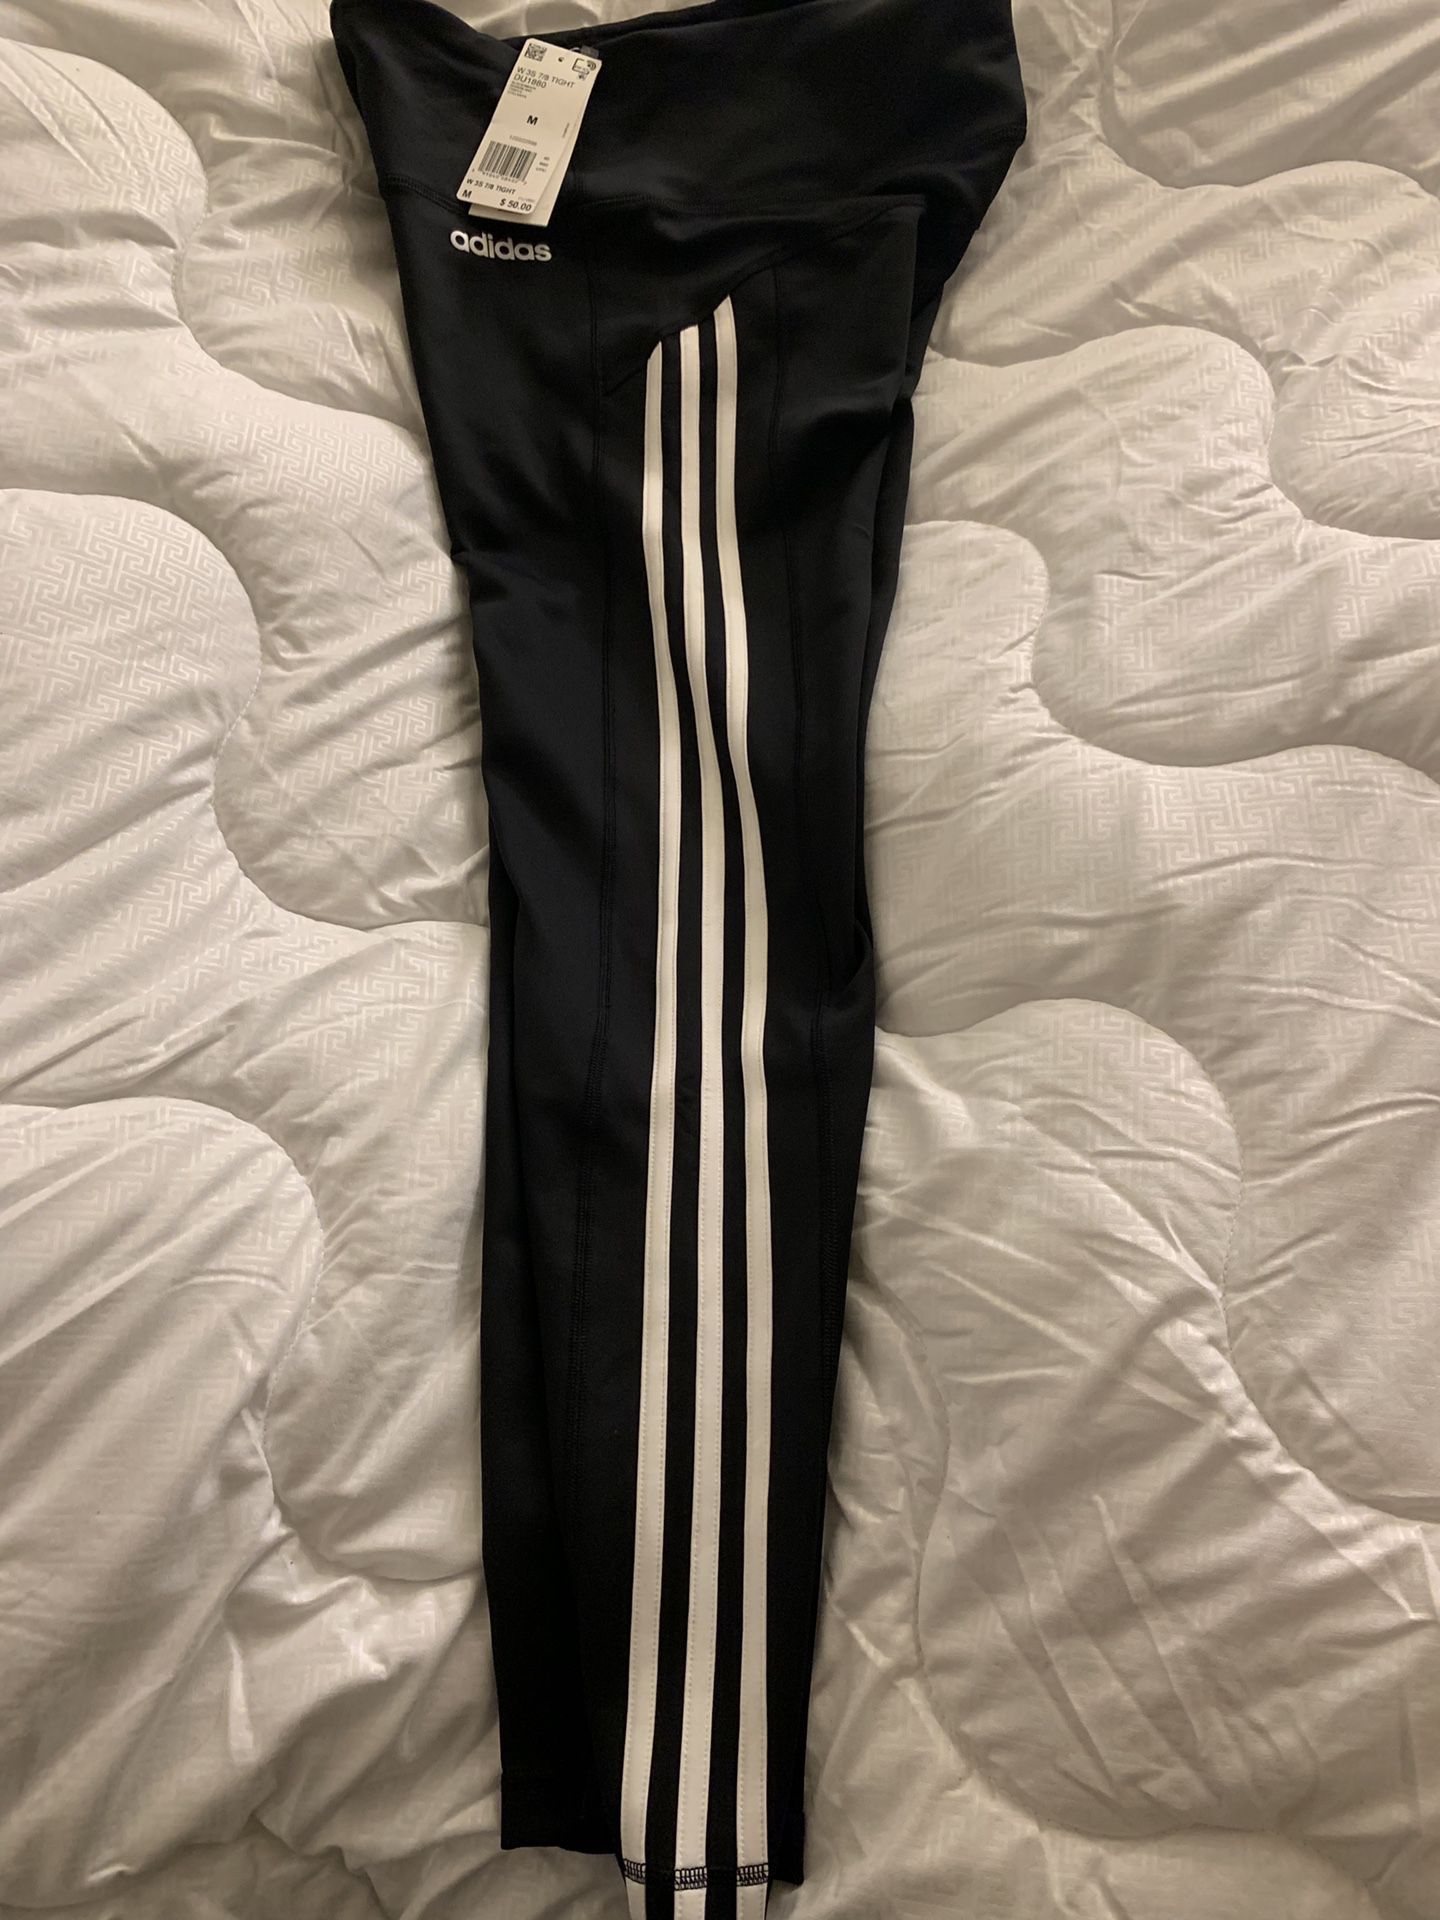 New!! Adidas leggings work out pants